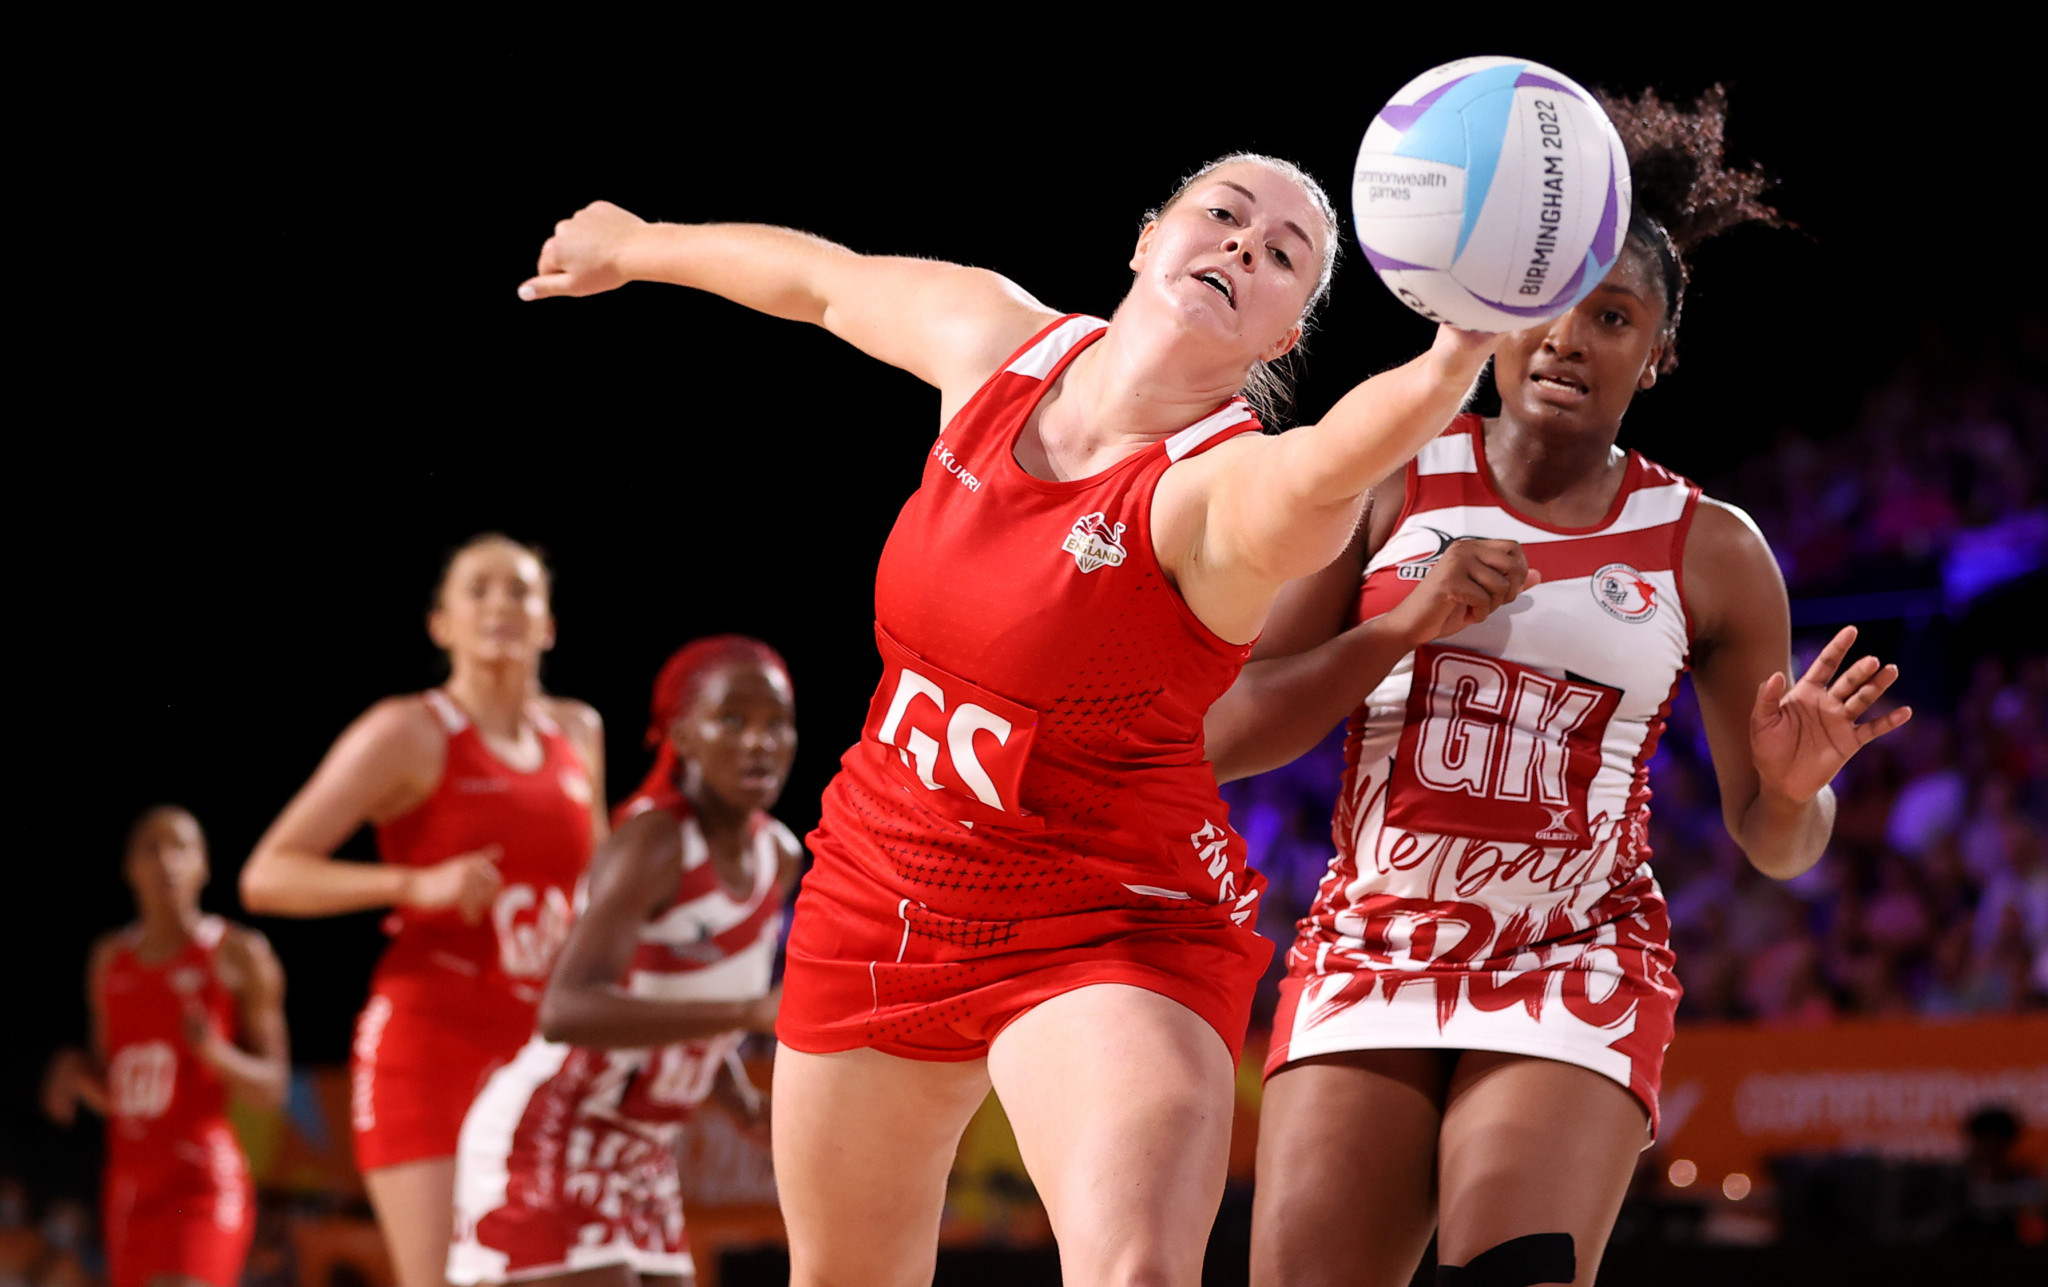 Massive wins for England and Australia as netball begins at Birmingham 2022